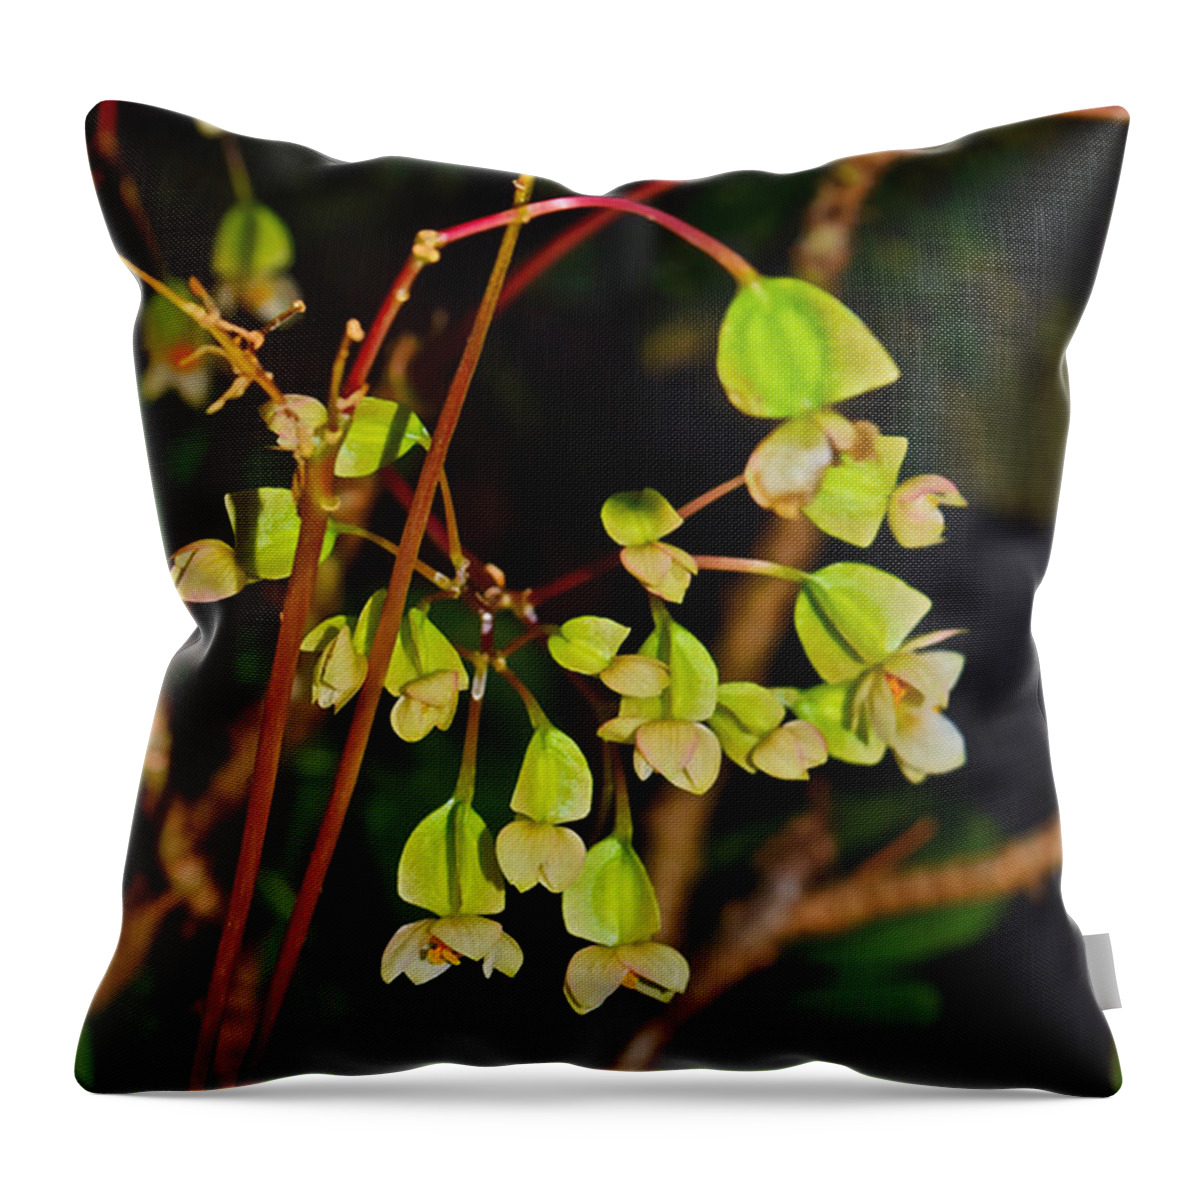 Begonia Throw Pillow featuring the photograph Conservatory Begonia by Janis Senungetuk